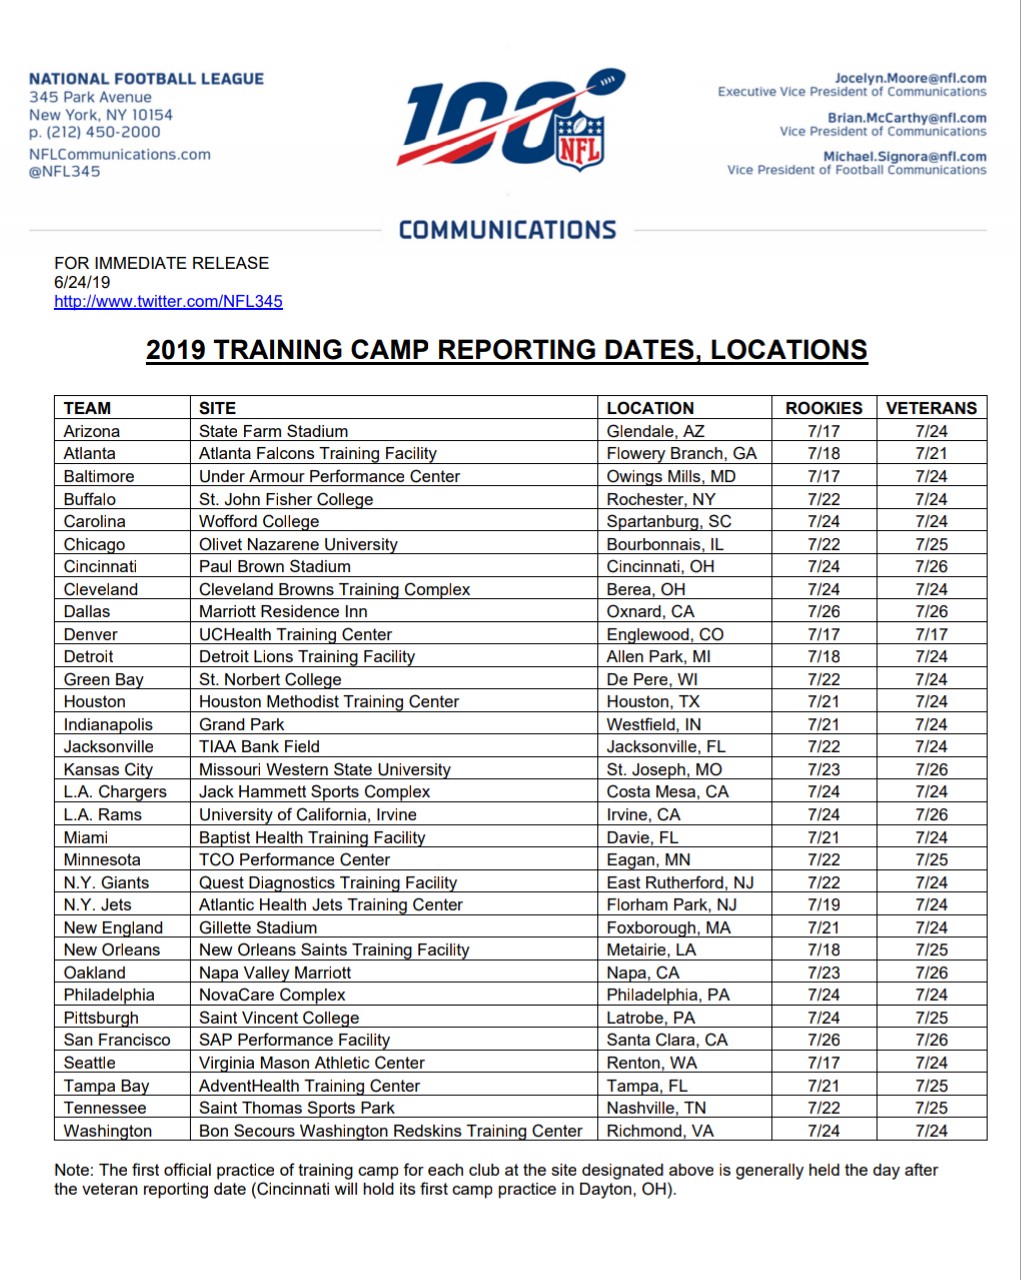 NFL announces training camp dates, locations for all teams